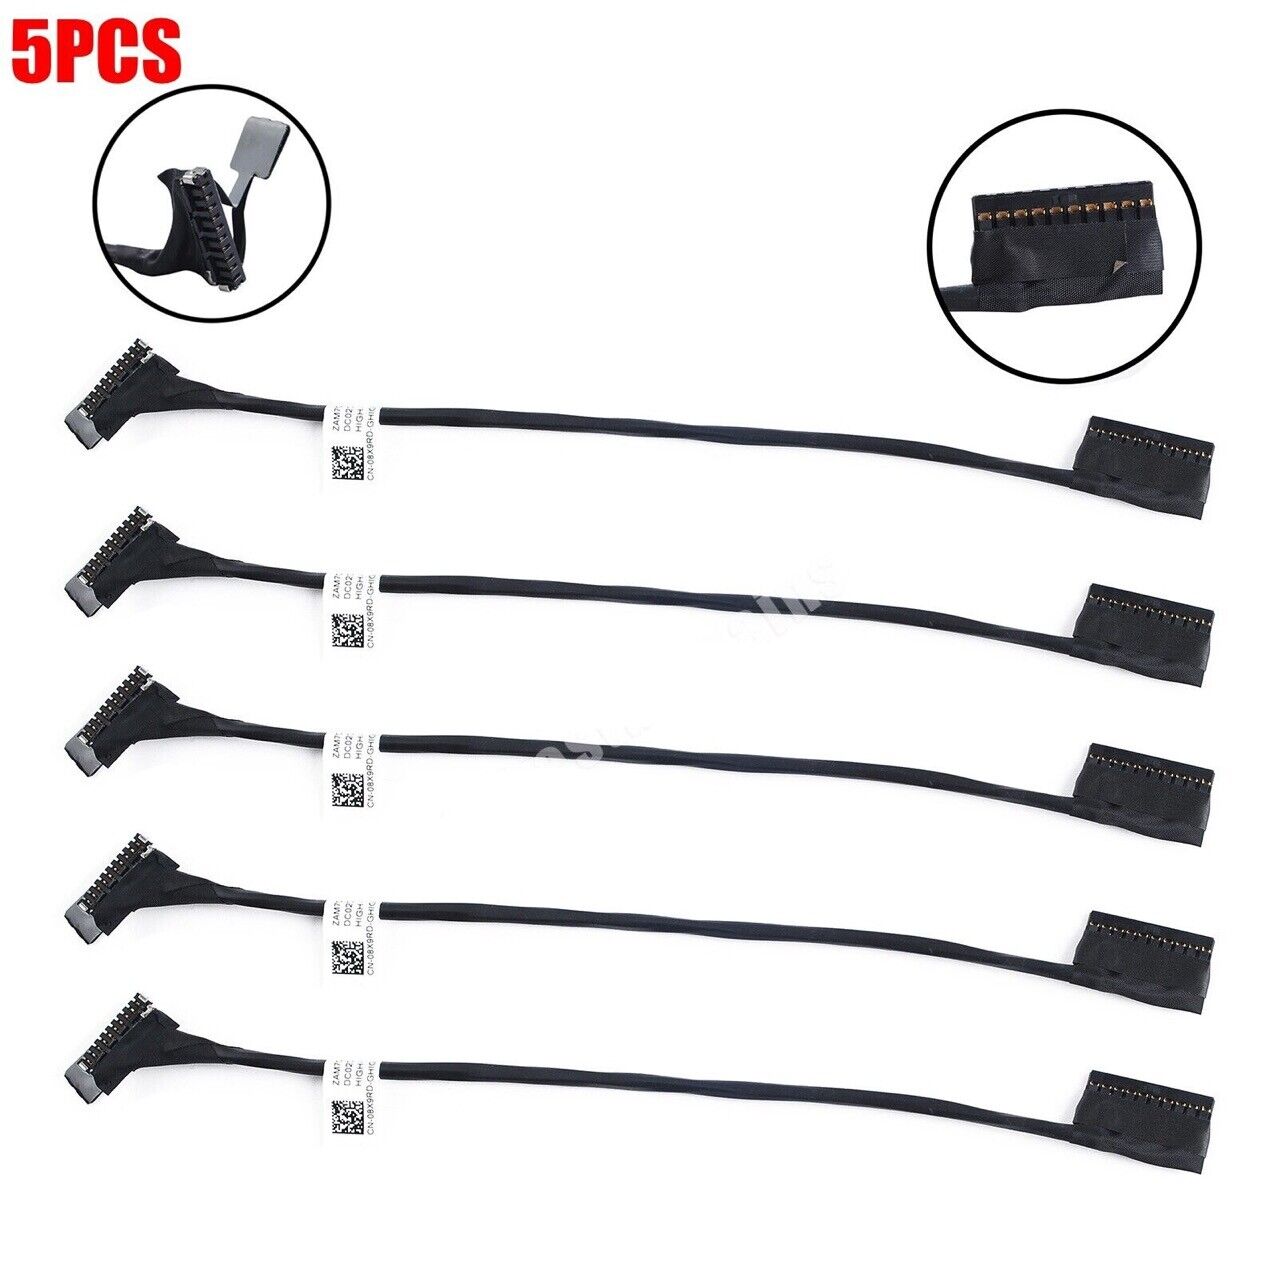 5pcs NEW Battery Cable for Dell Latitude E5450 ZAM70 8X9RD 08X9RD DC02001YJ00